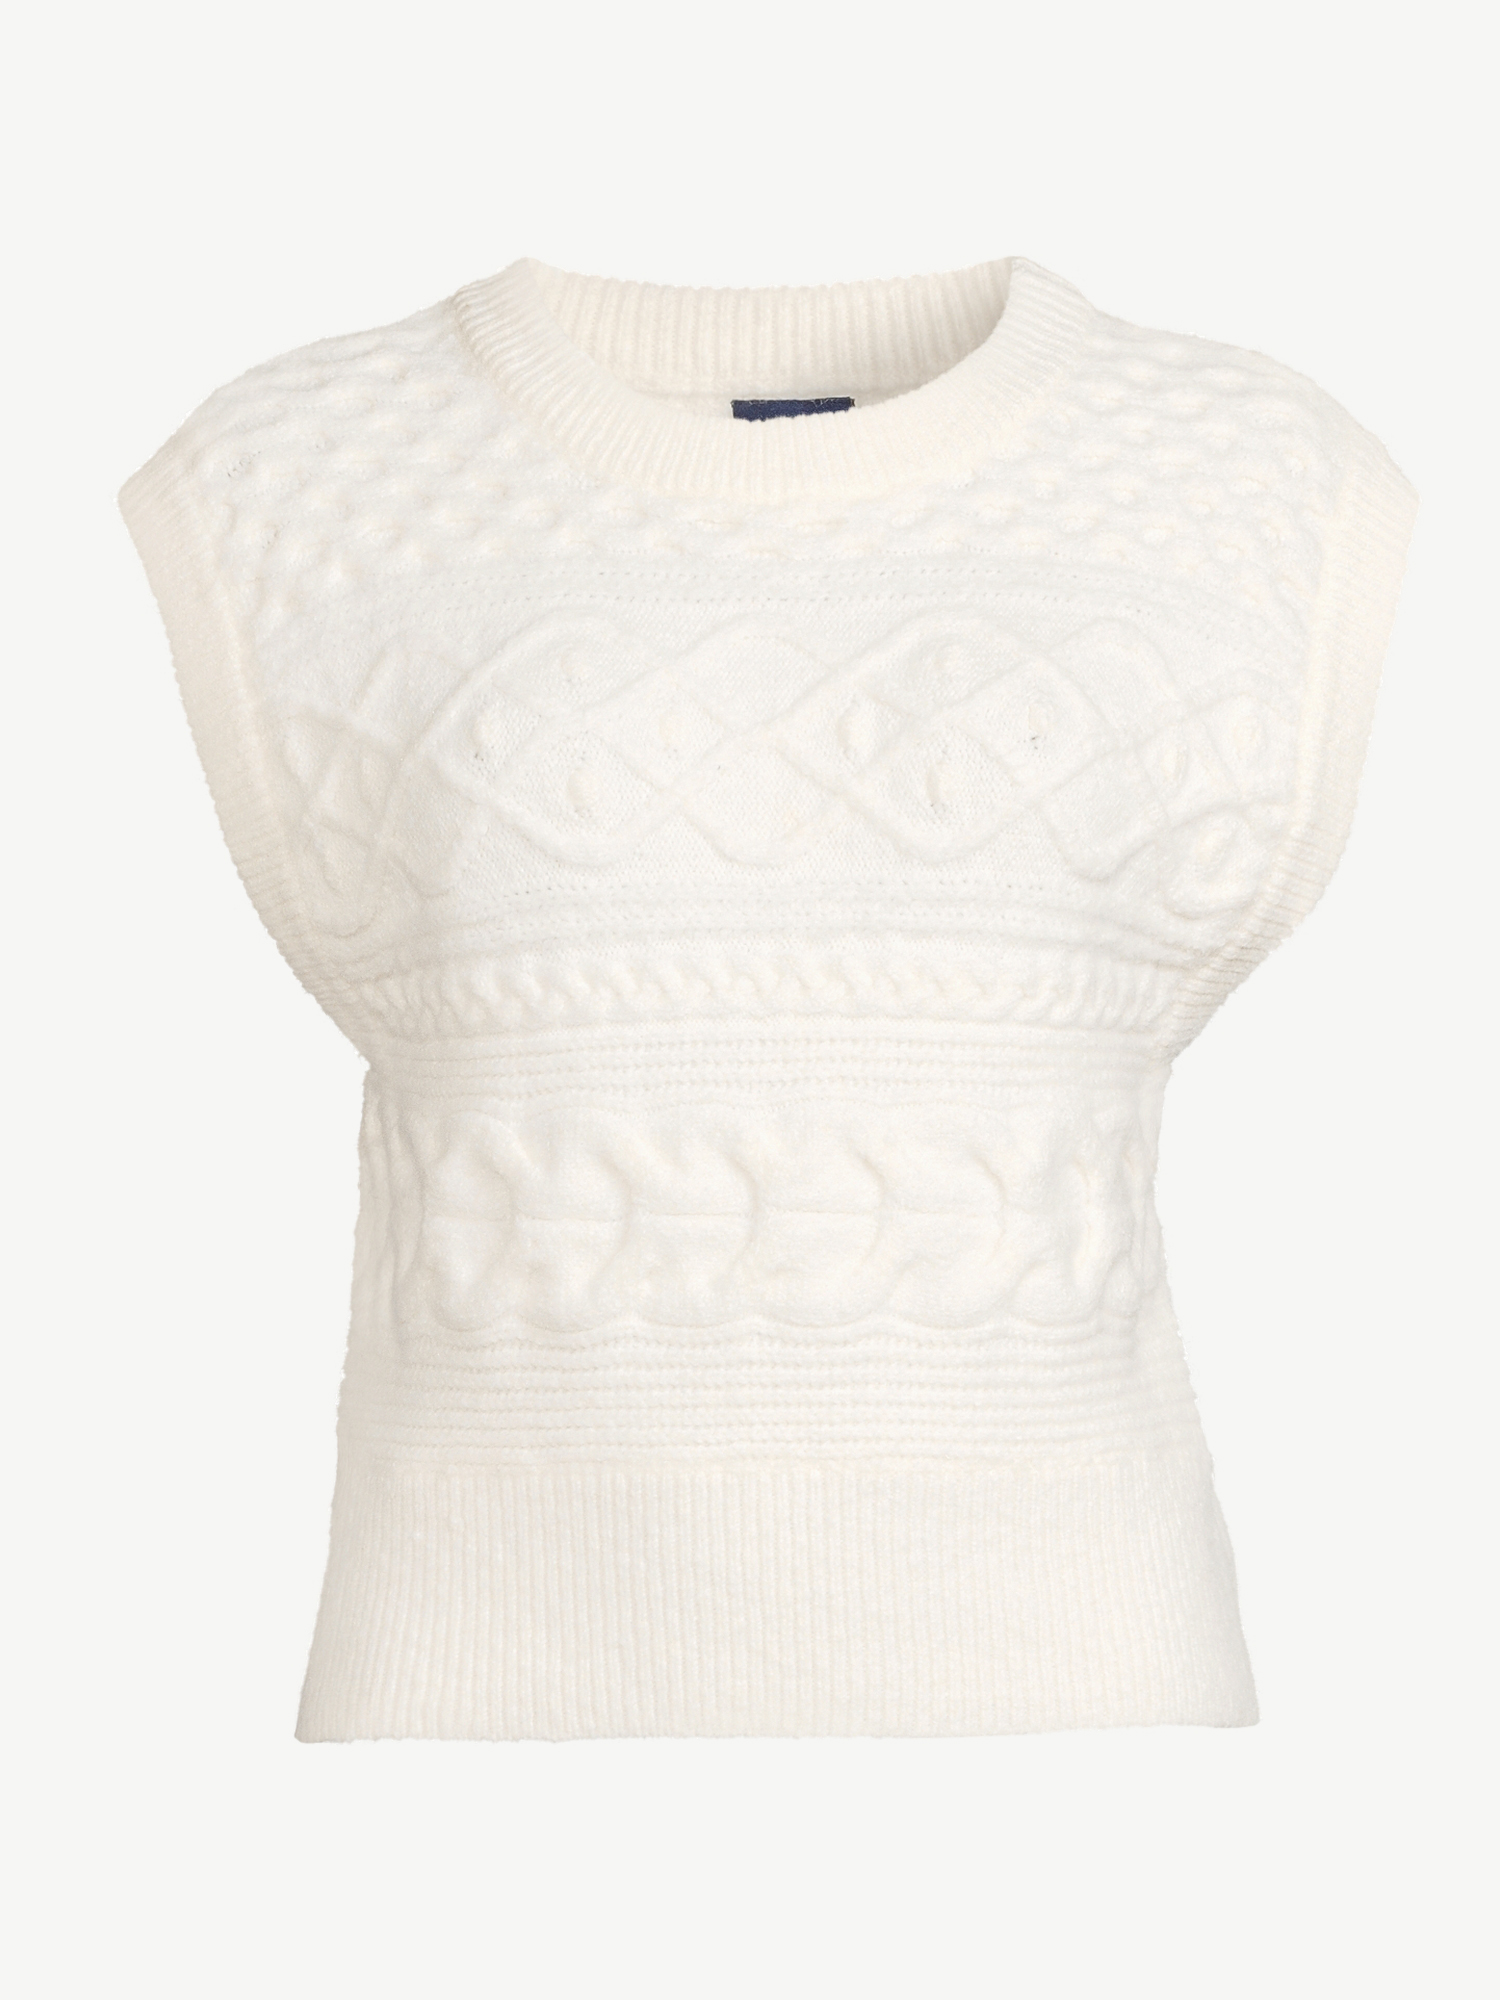 Scoop Women's Cable Knit Sweater Vest - image 5 of 6